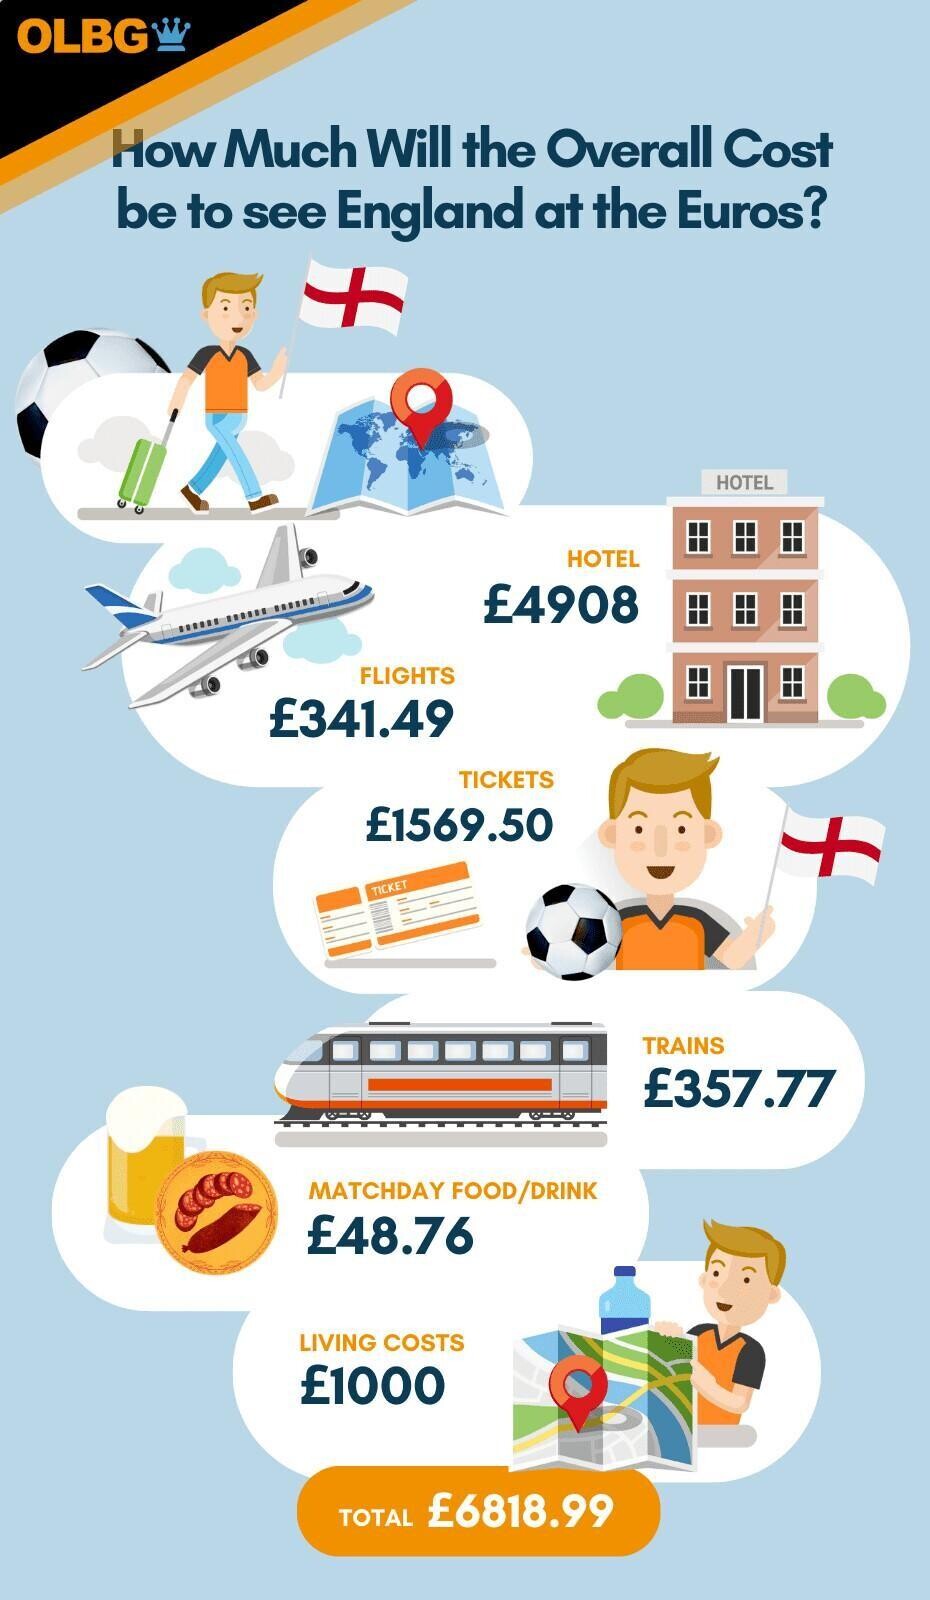 Cost to follow England - overall costs